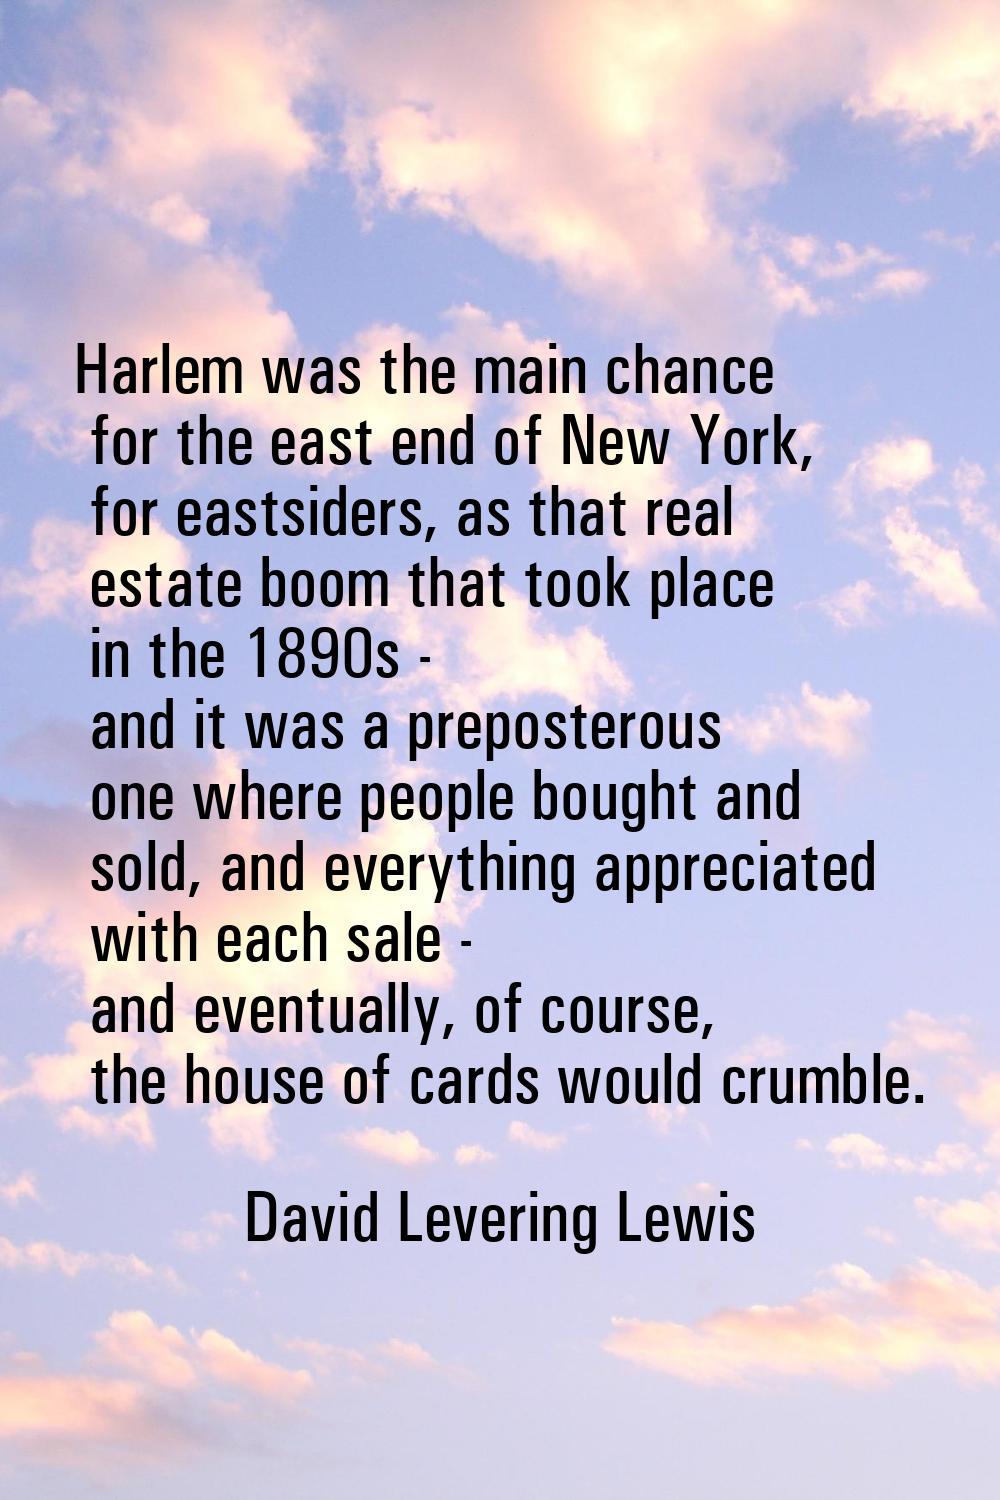 Harlem was the main chance for the east end of New York, for eastsiders, as that real estate boom t